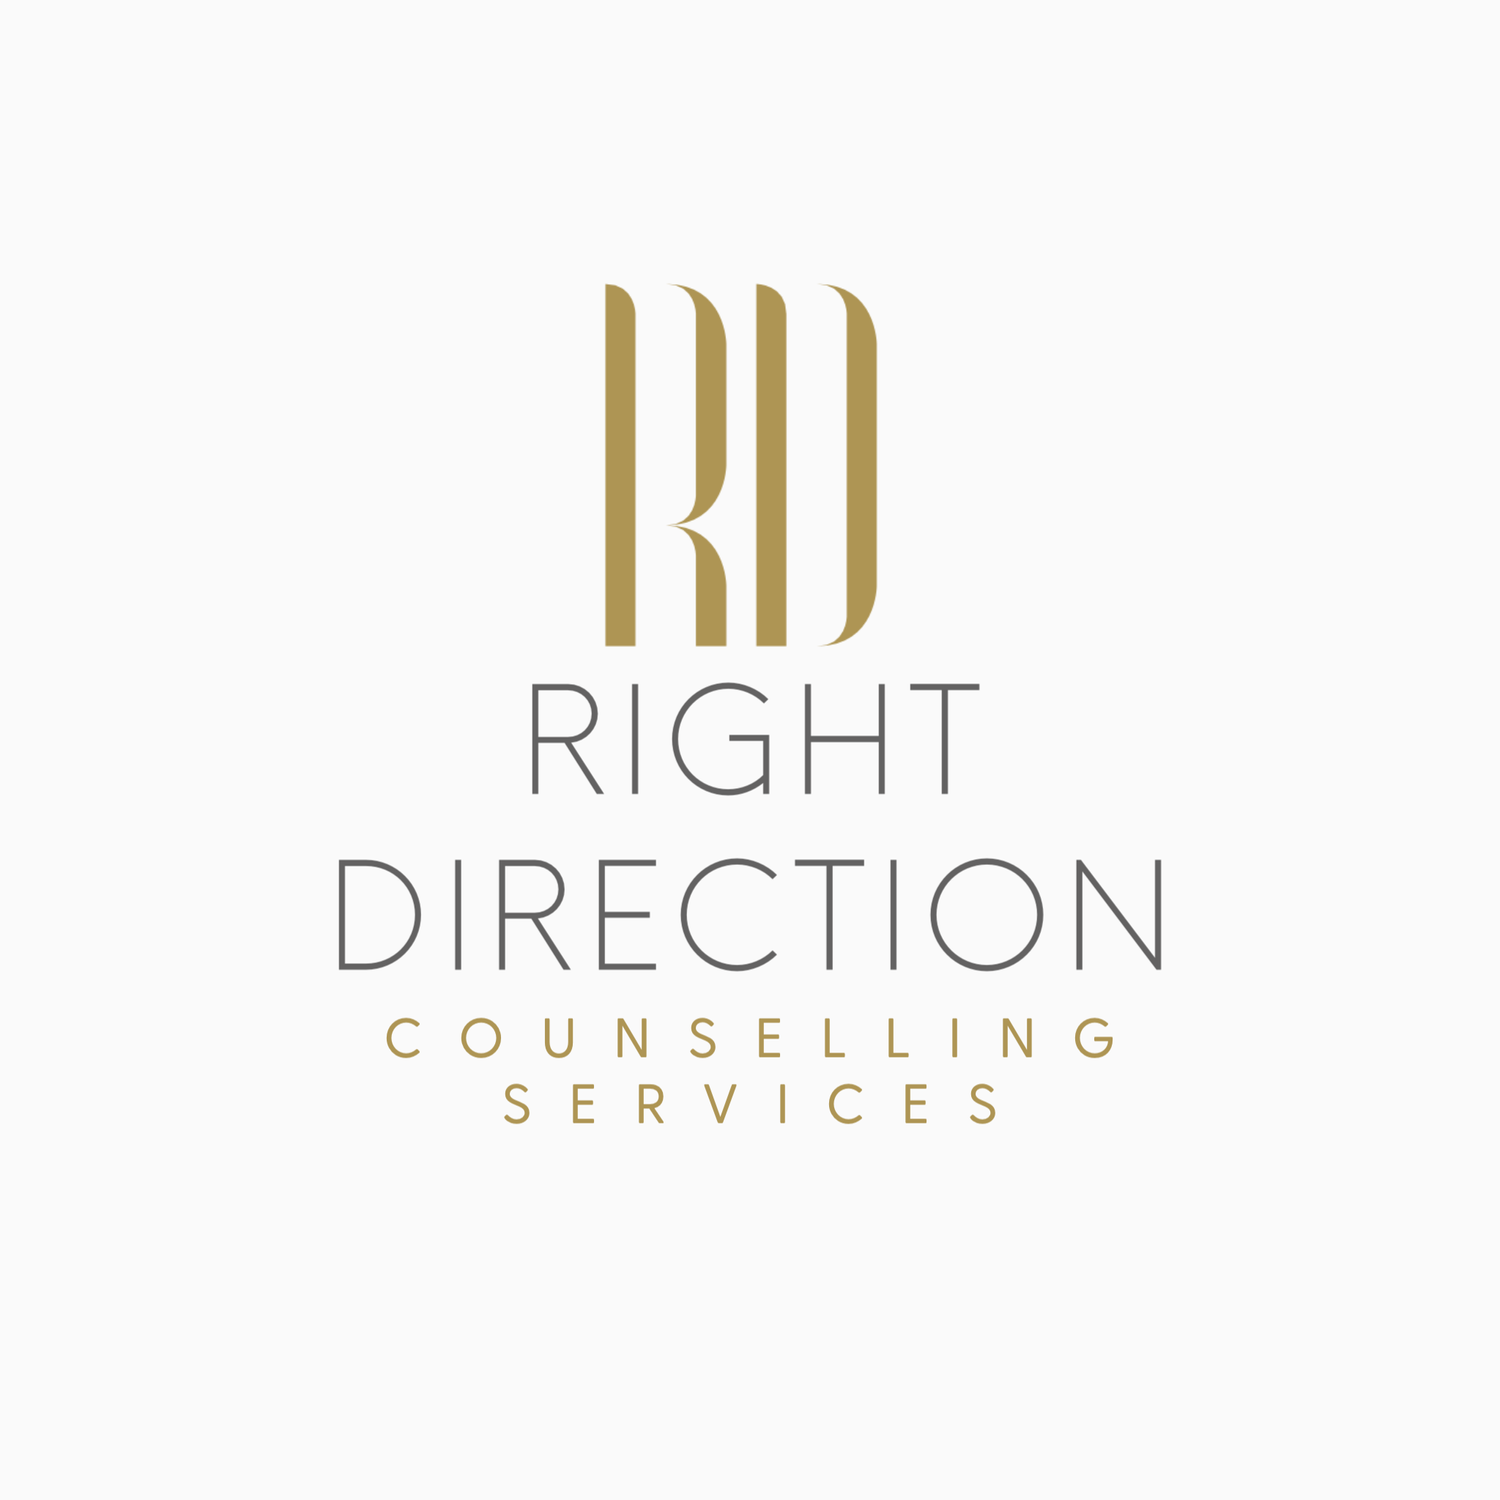 Right Direction Counselling Services